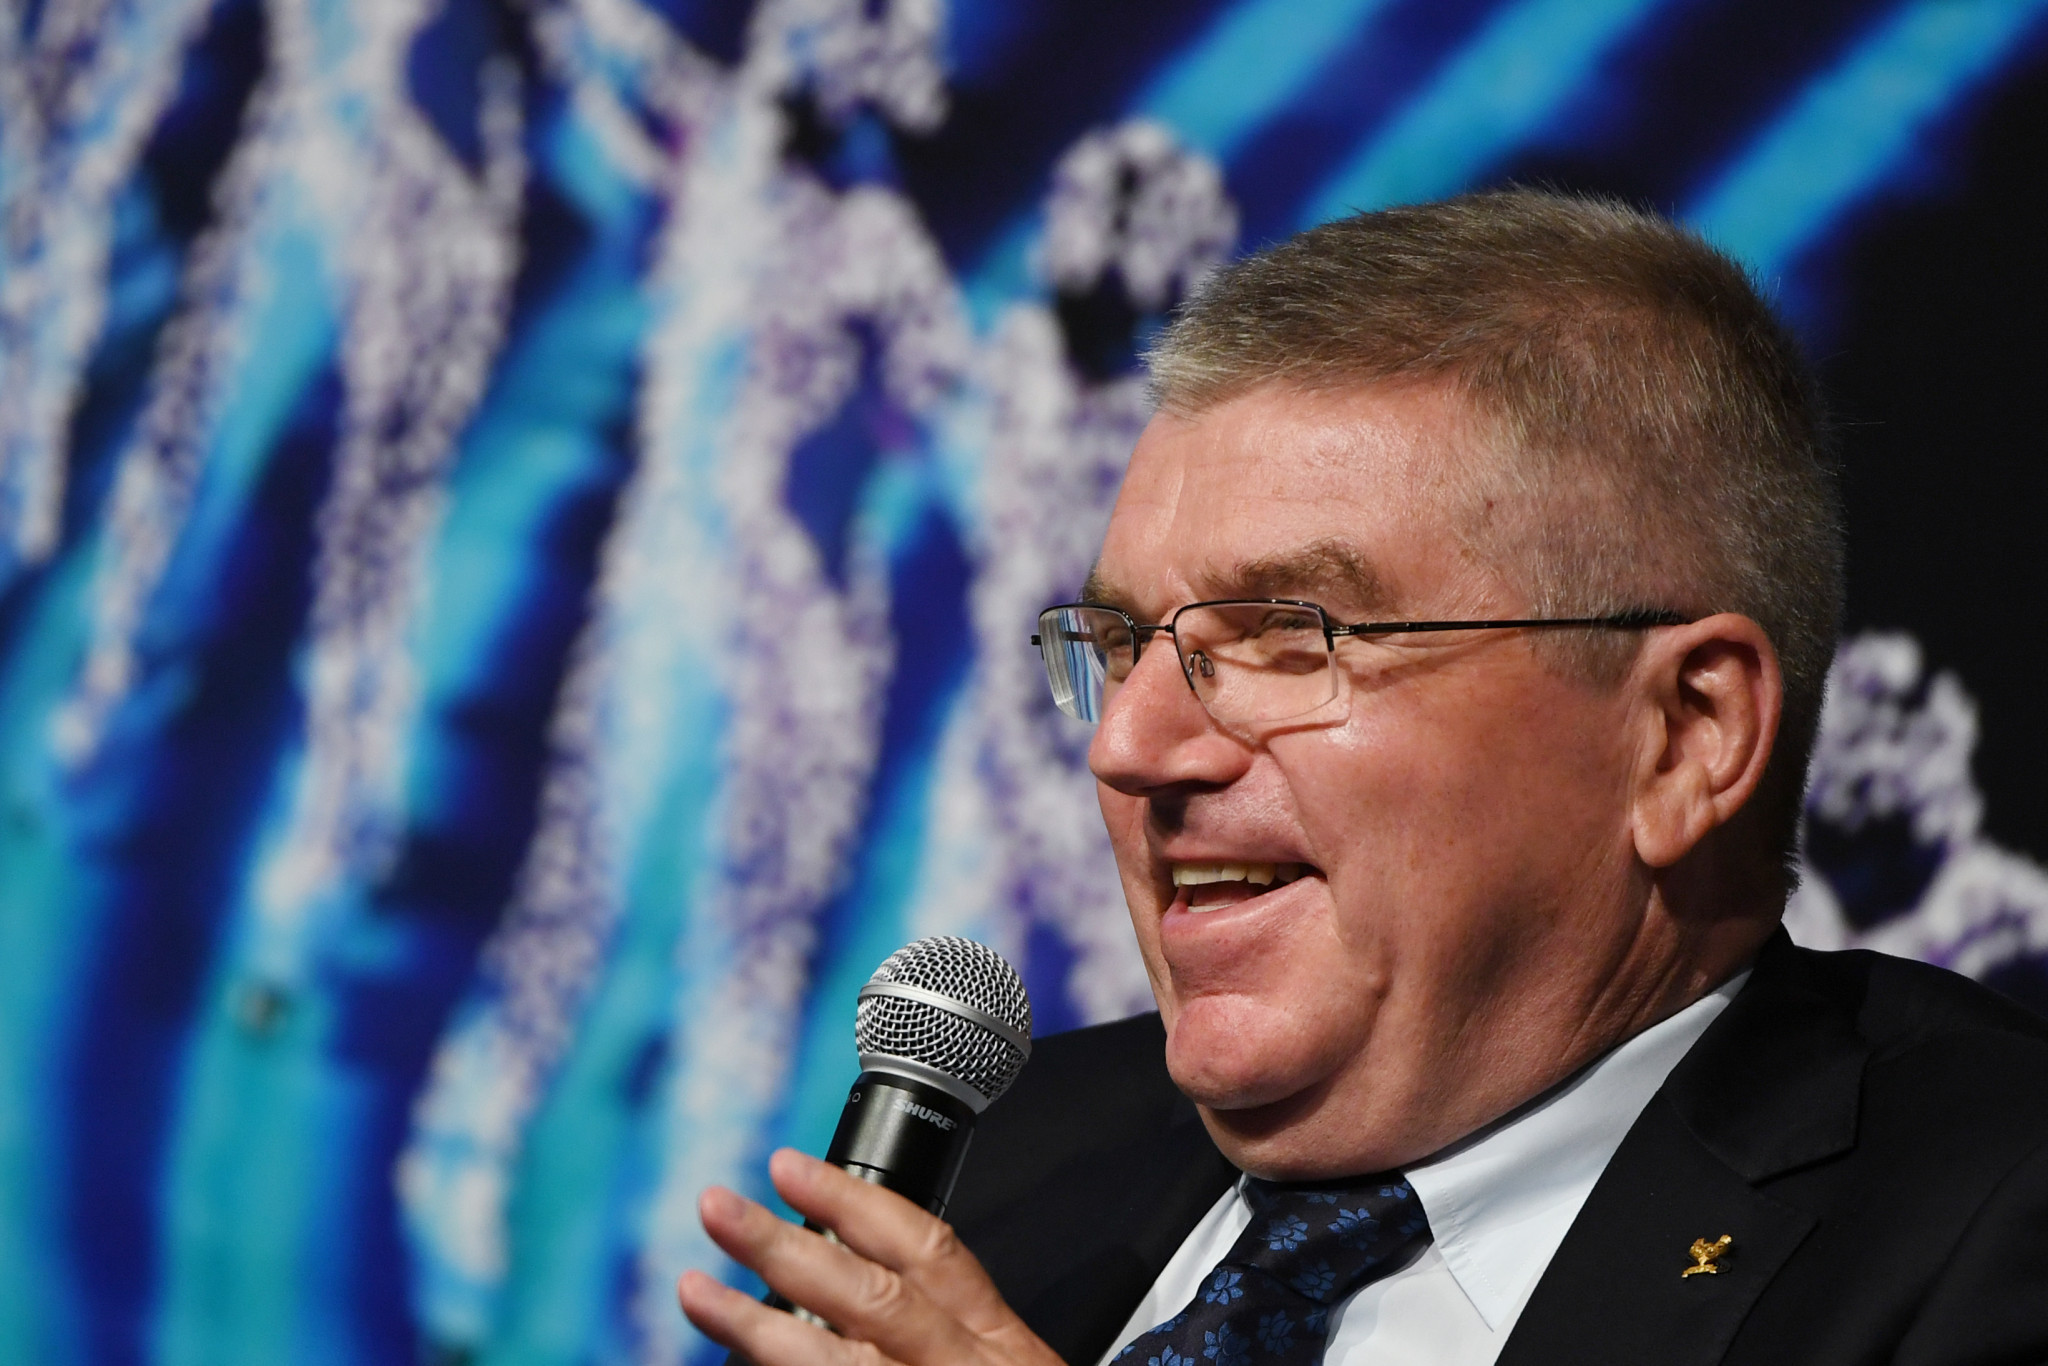 IOC President Thomas Bach will chair the Executive Board meeting ©Getty Images